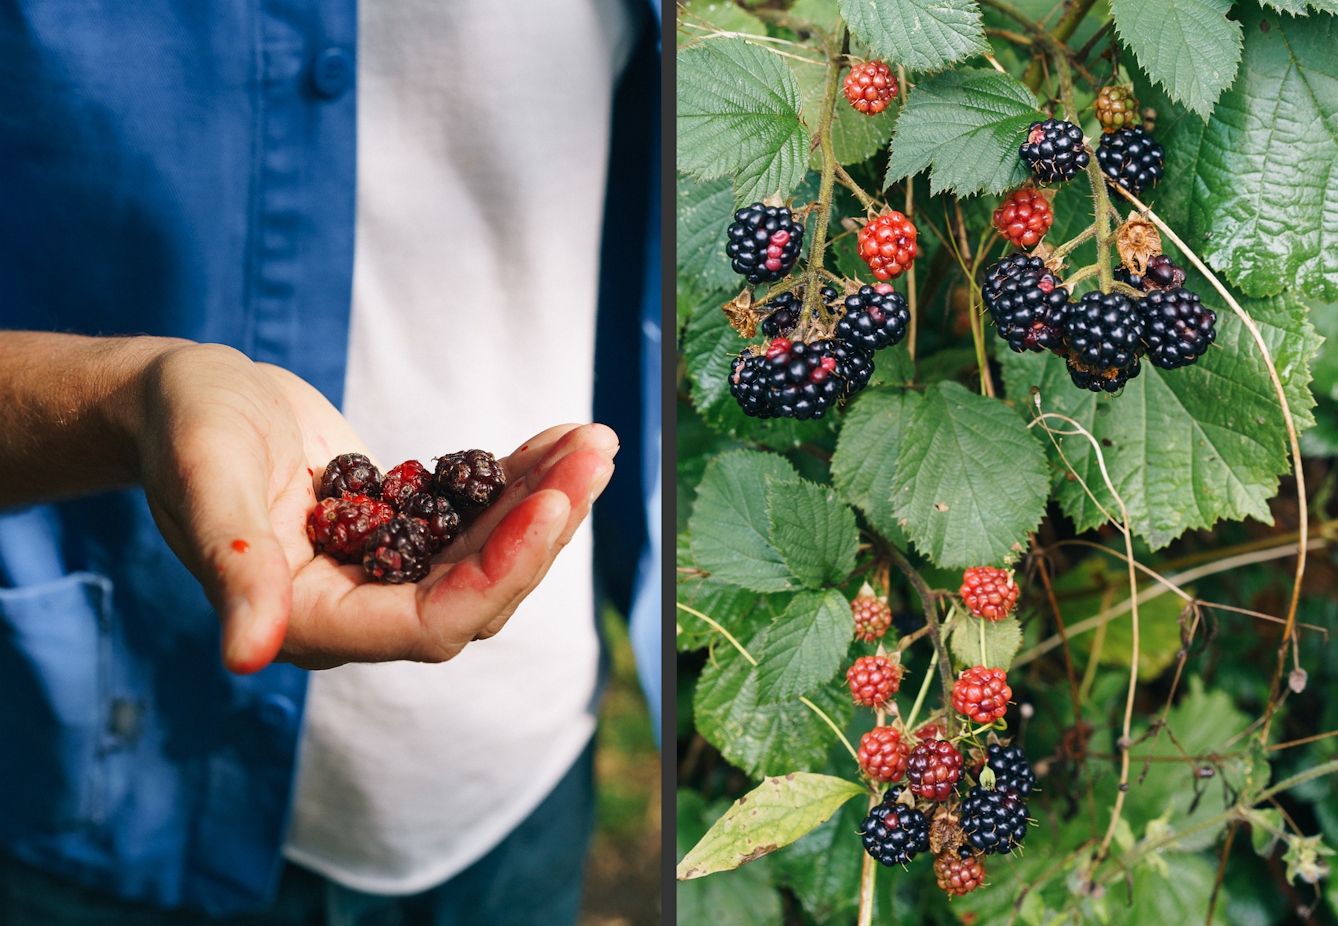 Photographic diptych. The image on the left shows a close-up of a man's hand holding several blackberries. His fingers are stained with the blackberry juices. In the background you can see his torso. He's wearing a white t-shirt and an unbuttoned blue shirt. The image on the right shows a close-up of blackberries in different stages or ripeness growing on a bush. The berries are surrounded by the green leaves of the bush.